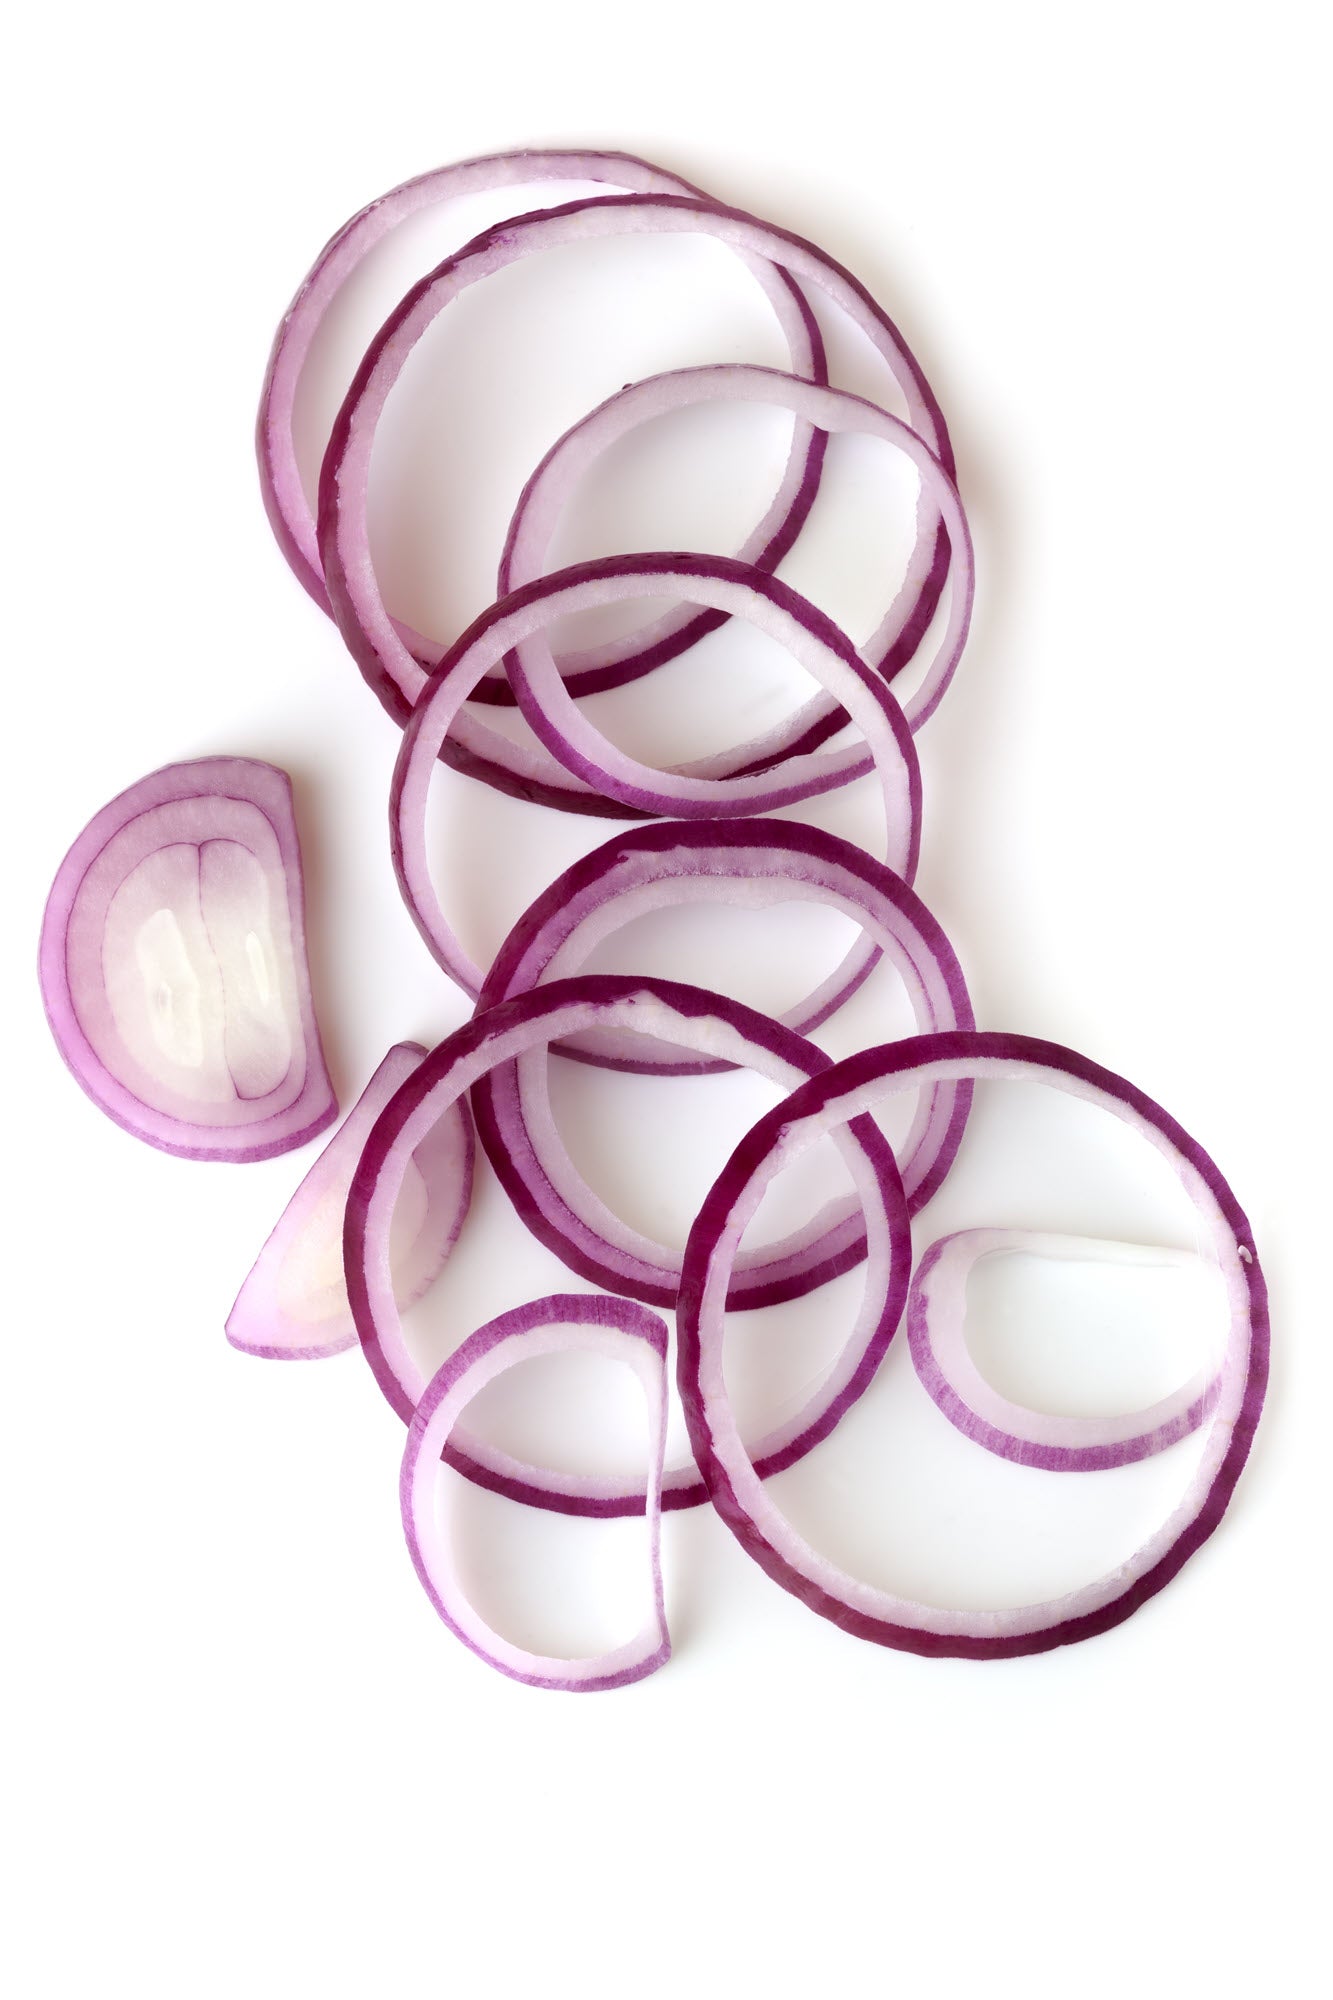 On display are slices of red onions, of the variety Short Red Creole. The red onion slices are loosely laid from north to south, overlapping each other.  The red onion slices are displayed on a pure white surface, and viewed from above. 